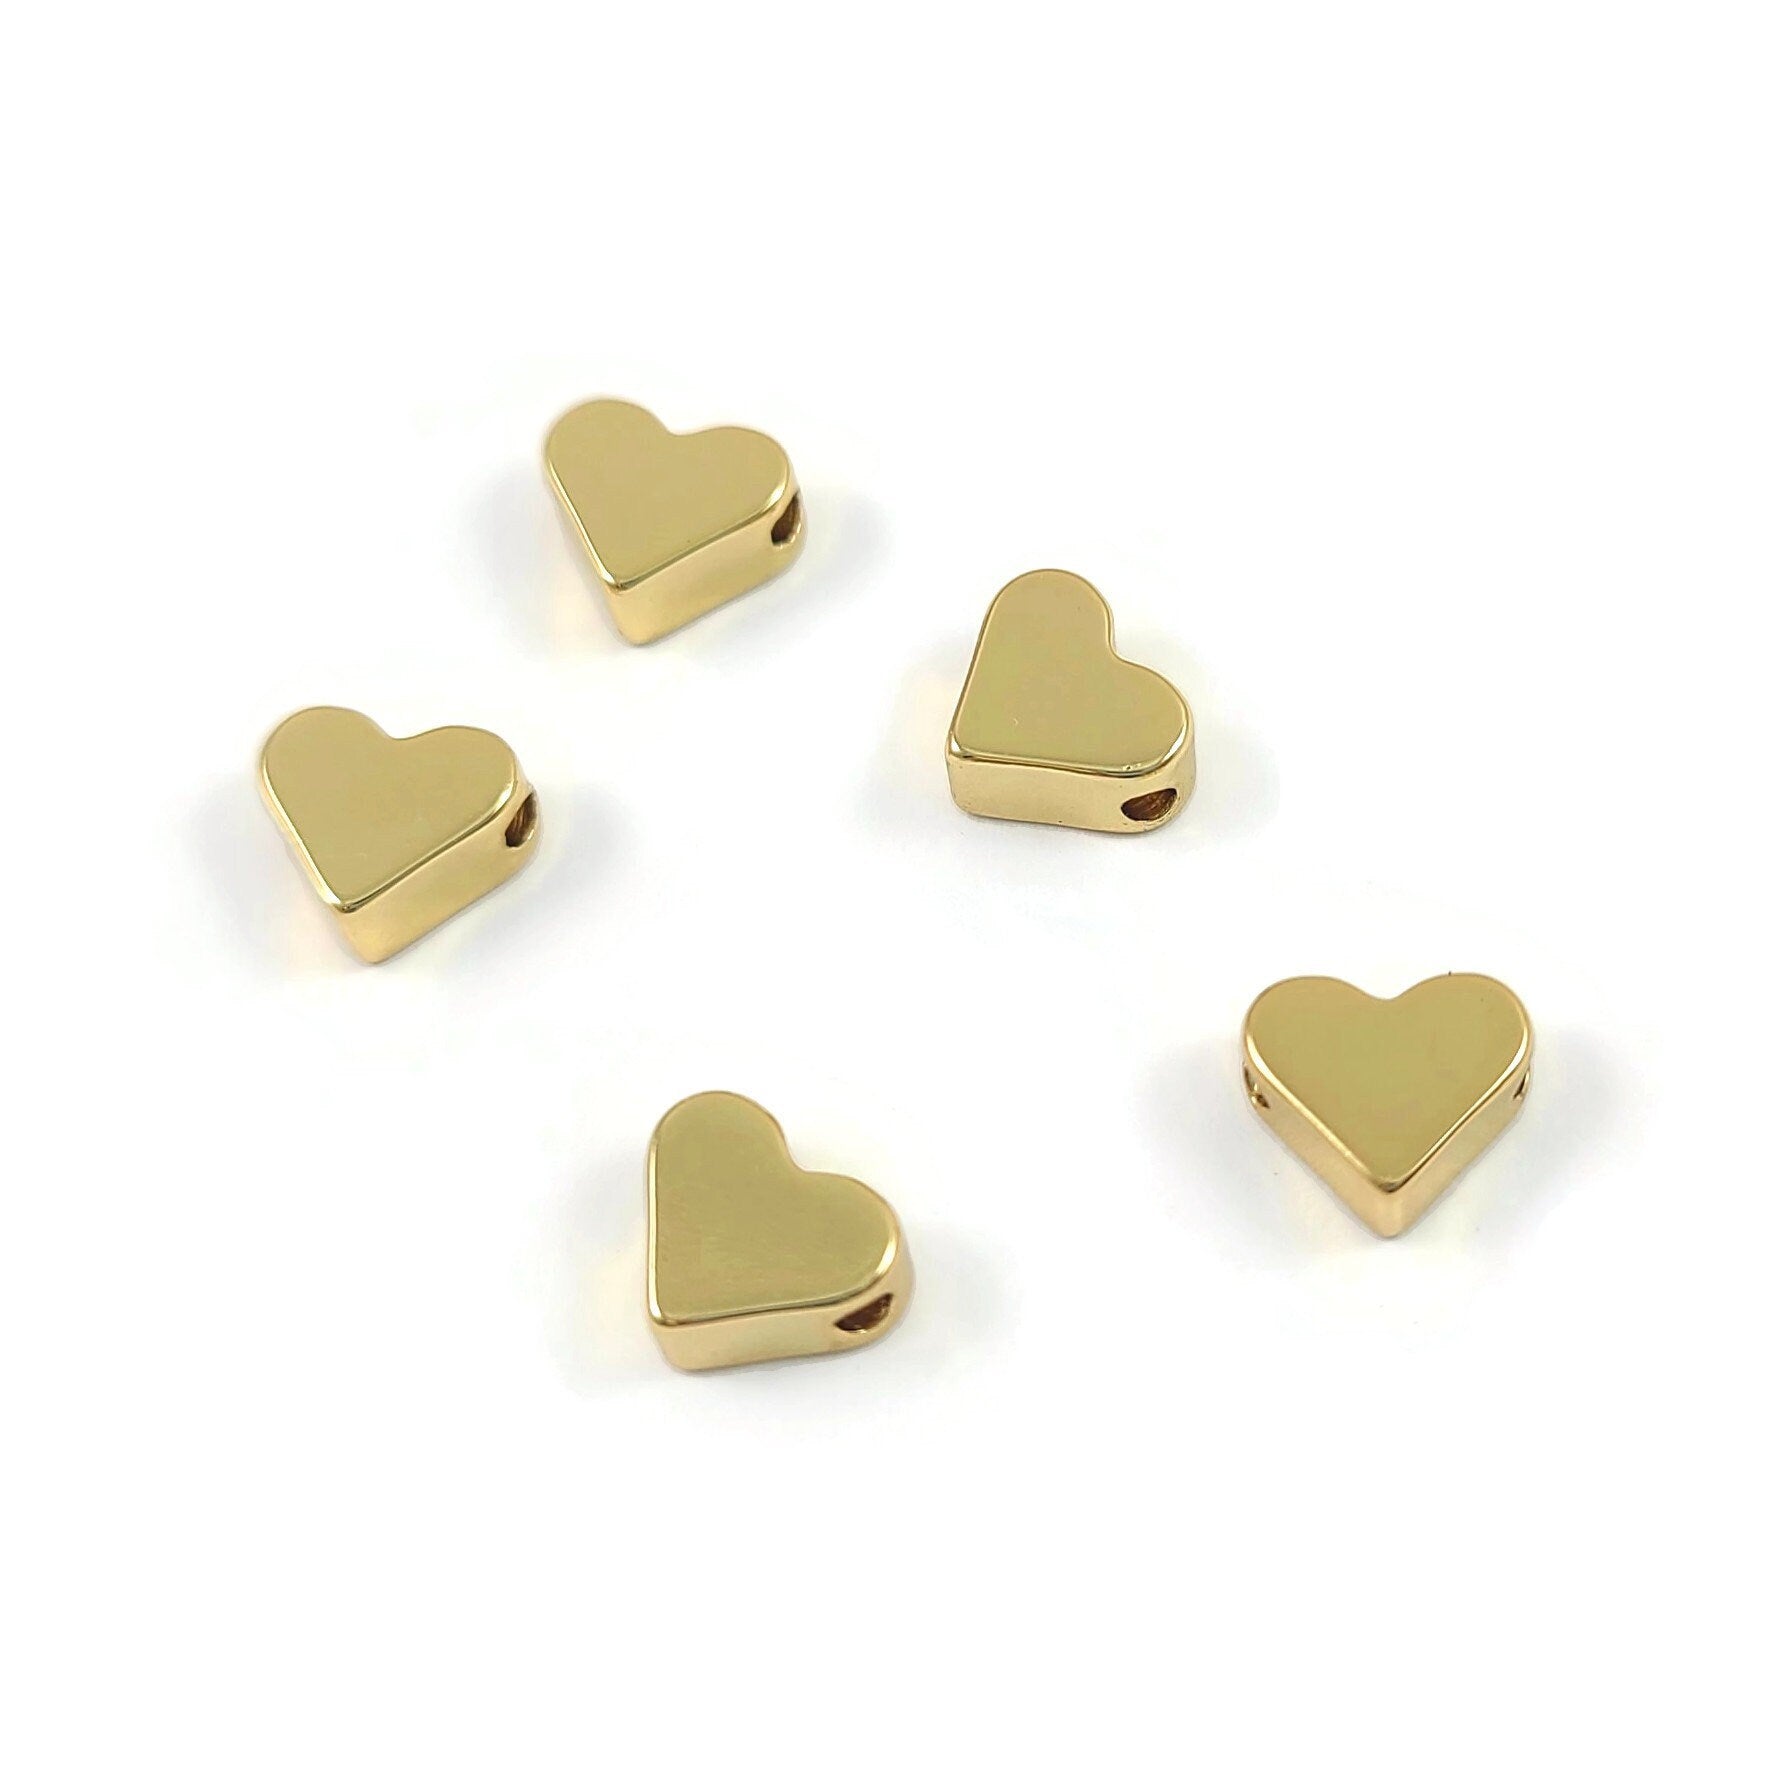 18K Gold Filled Heart Beads, Large Hole Bead, Love Beads for